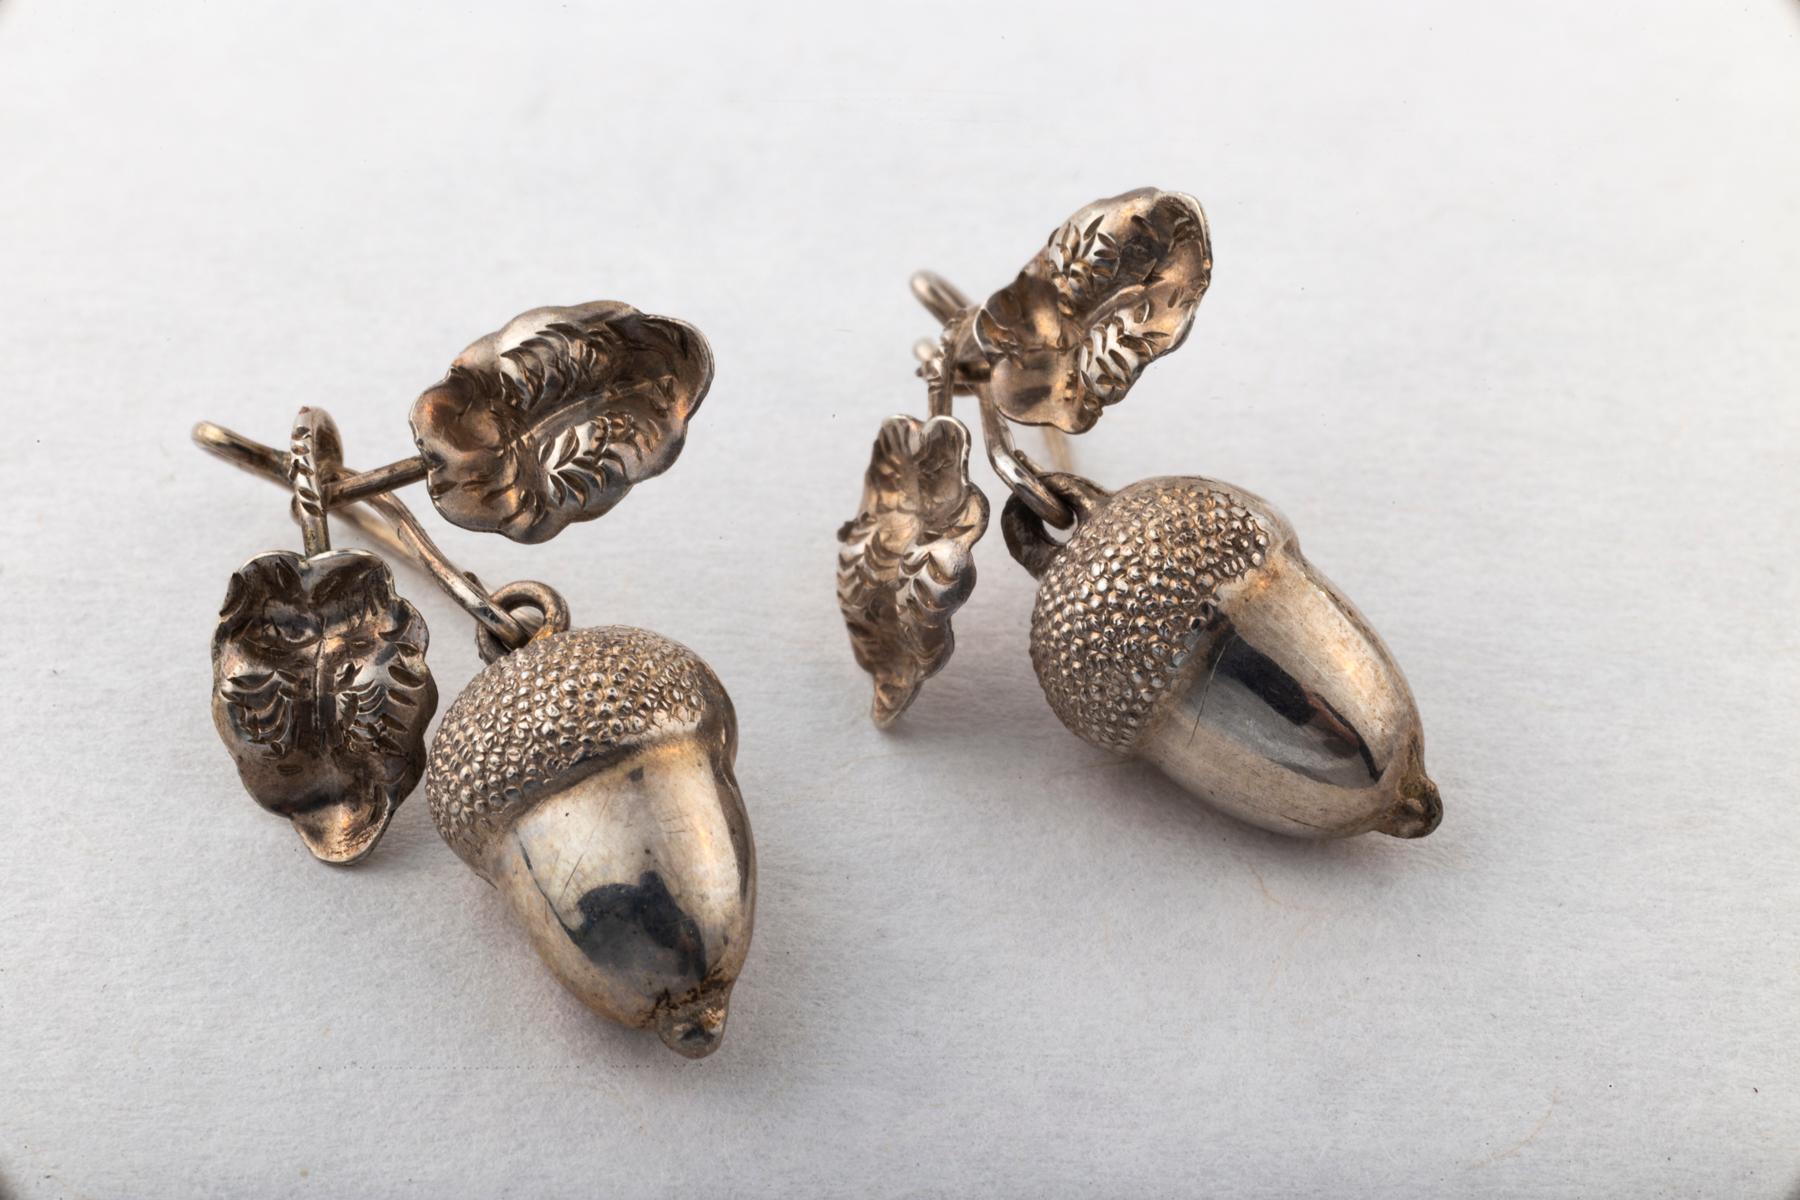 Sweet Puffy Silver light in weight Acorn earrings made in the Victorian Period. The actual earrings are bright silver, brighter than the photo. The earrings are three dimensional and the oak leaves perfectly modeled and engraved. Victorians were